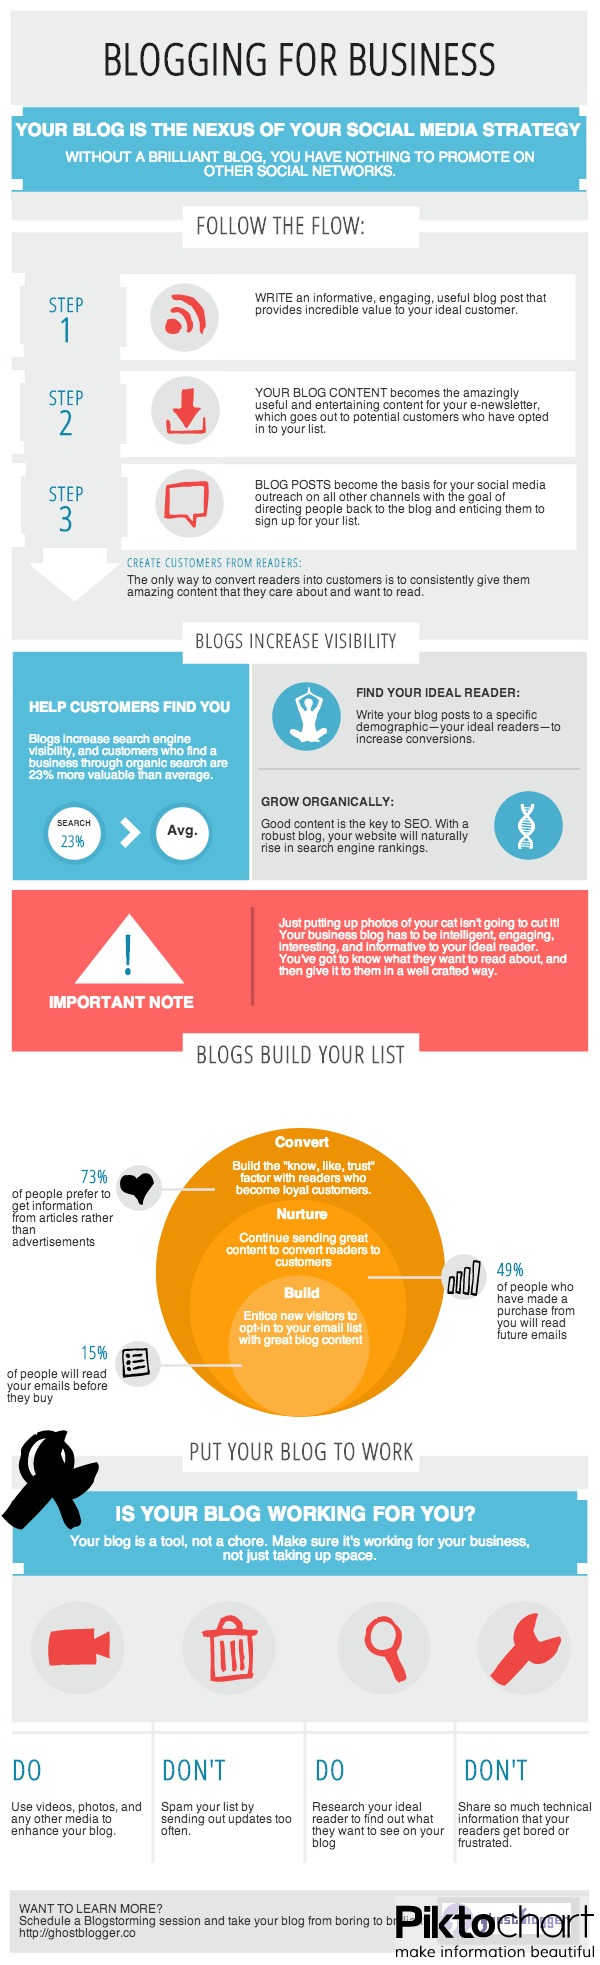 Blogs are the nexus of your social media strategy.